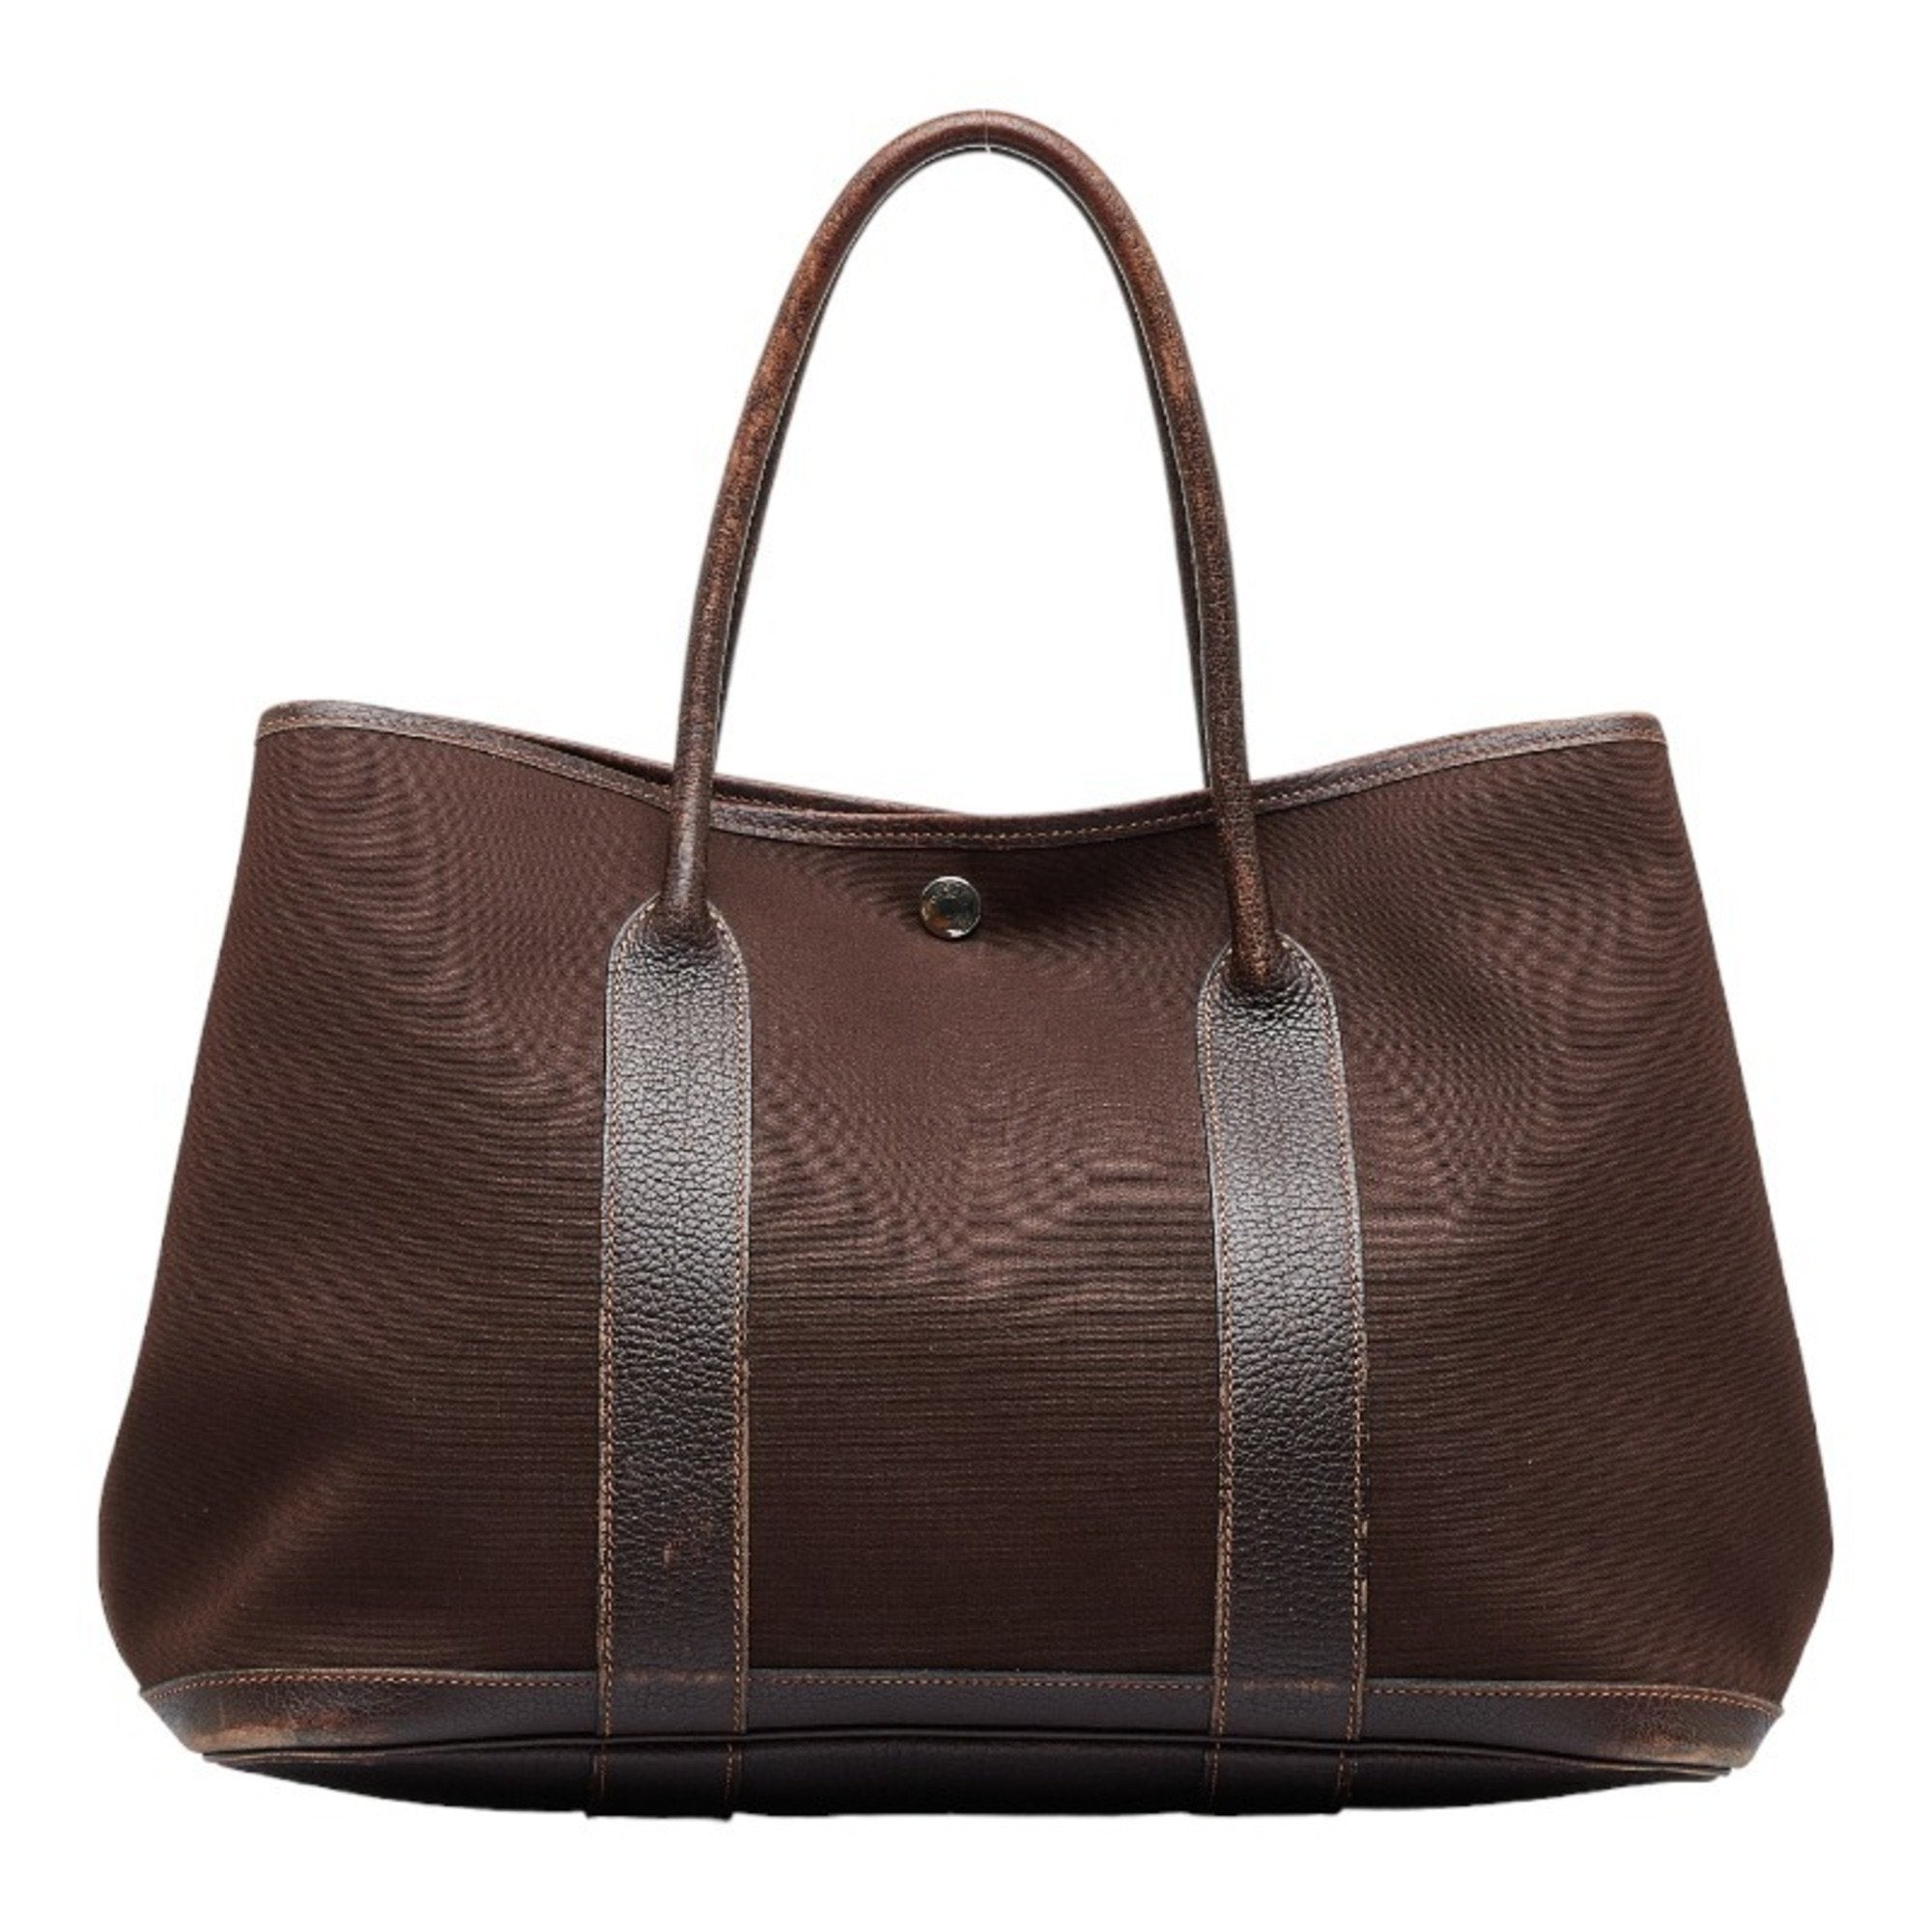 HERMES Garden Party PM Hand Tote Bag ia Leather Brown France